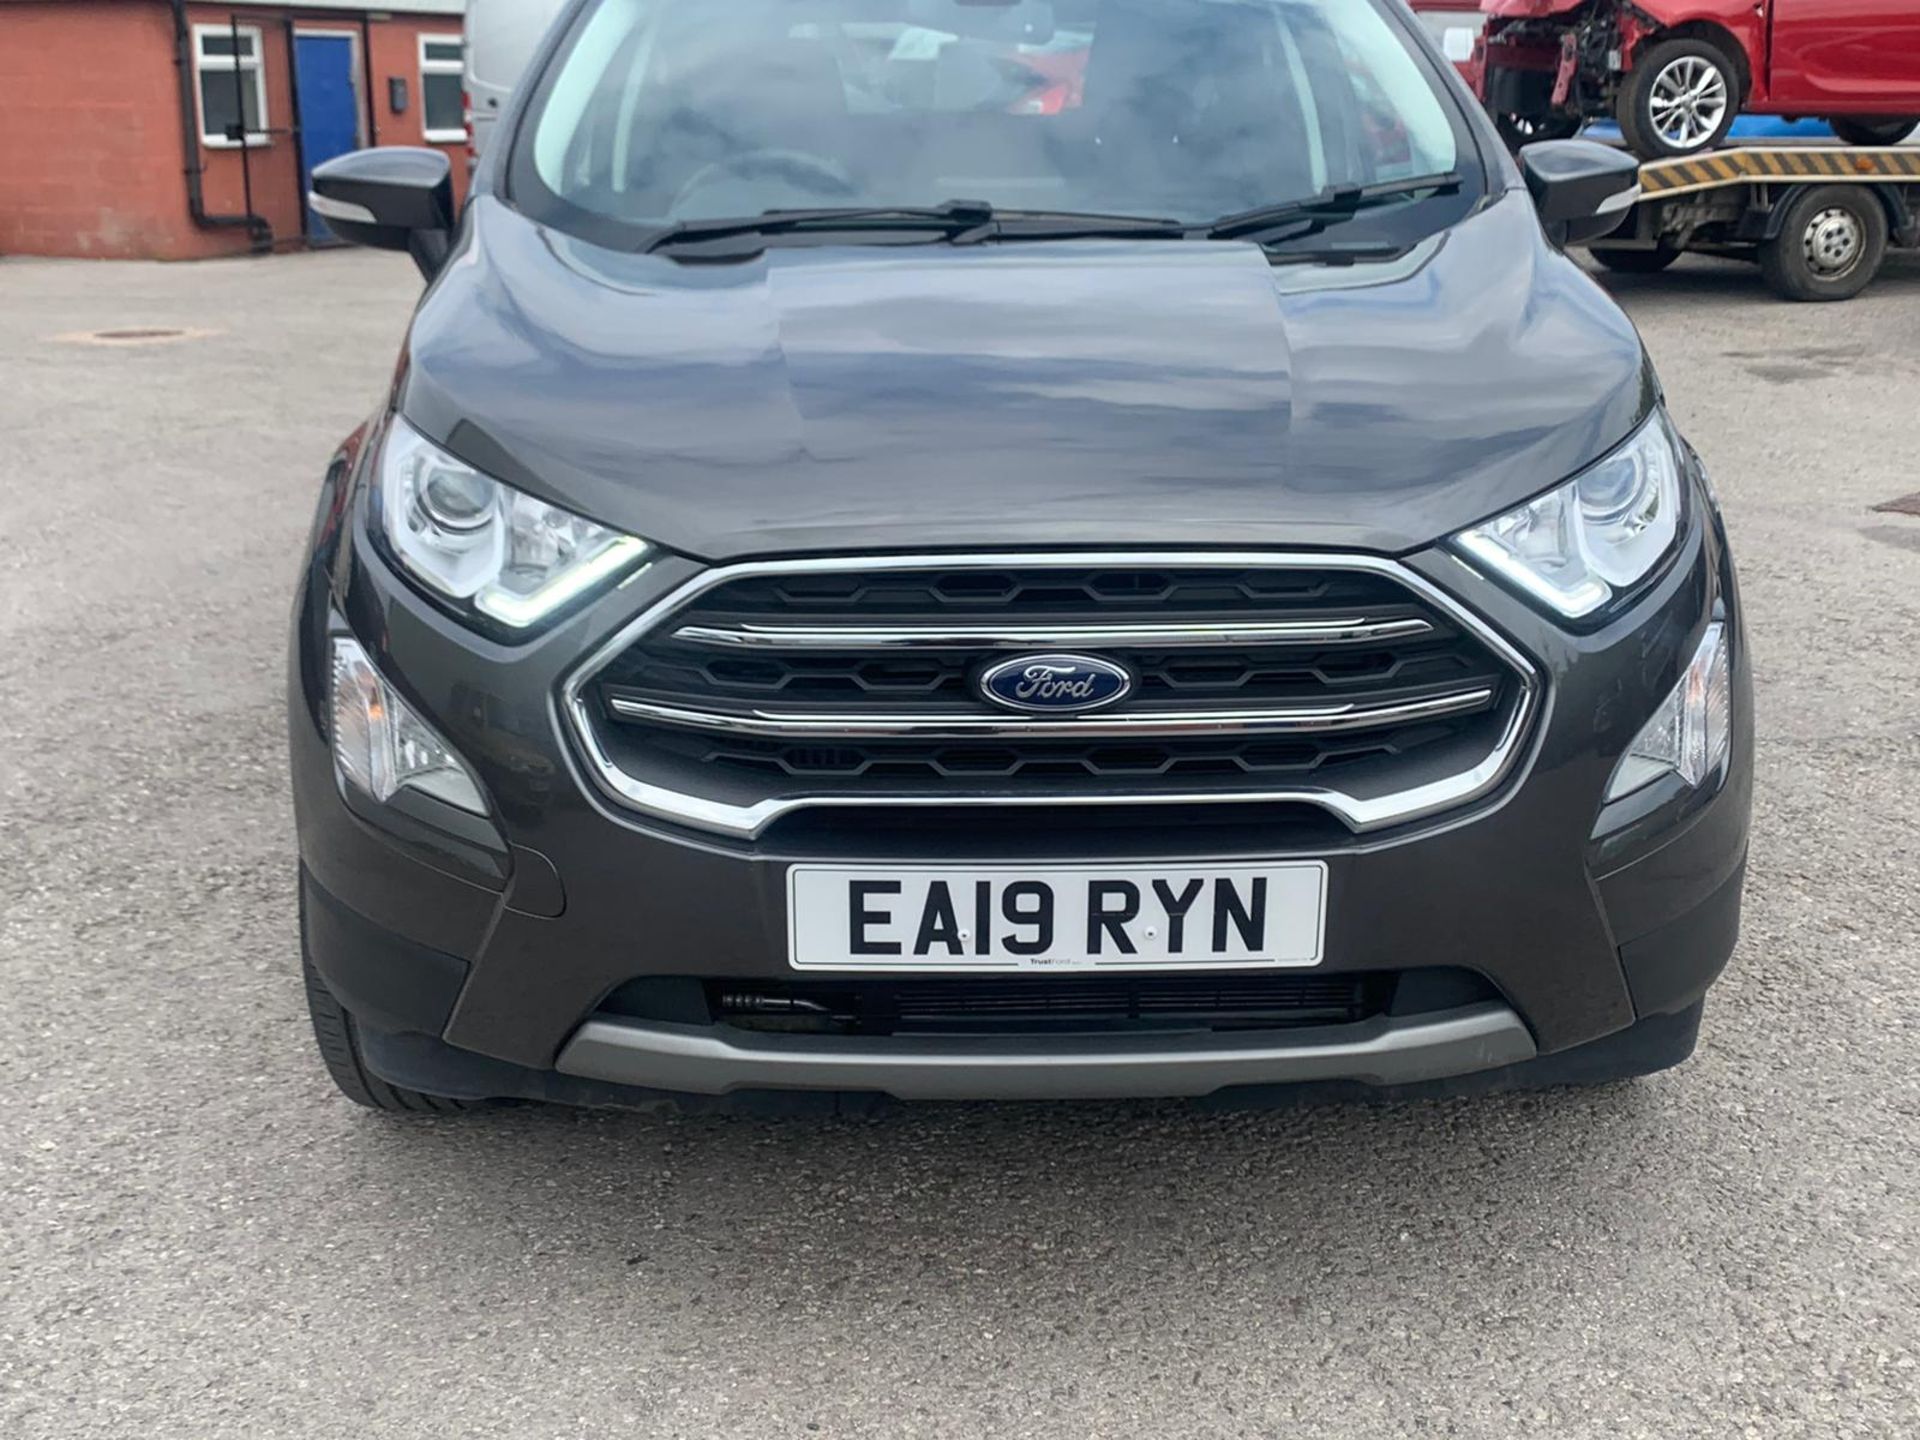 2019/19 REG FORD ECOSPORT TITANIUM 998CC PETROL 125BHP 5DR, SHOWING 0 FORMER KEEPERS *NO VAT* - Image 2 of 14